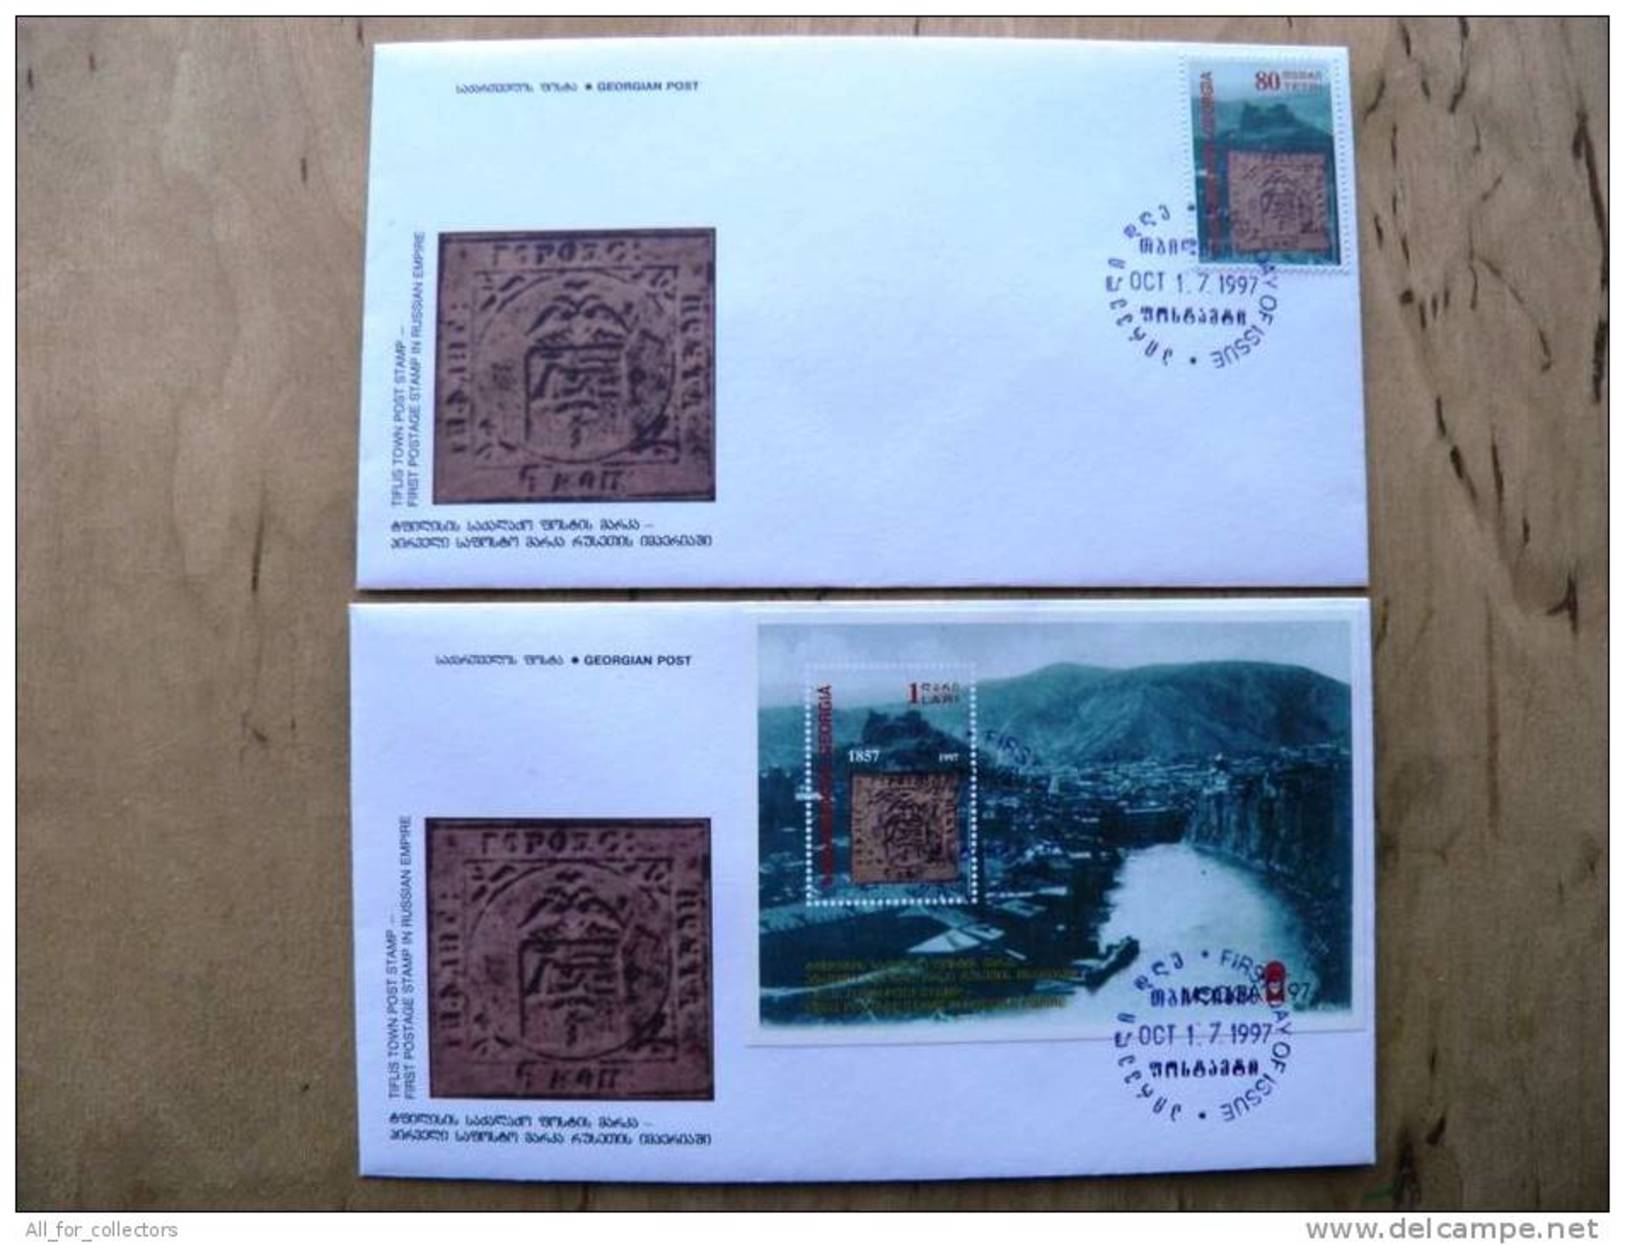 Georgia 1997 Mi# 255 Block13, 2 FDC Covers International Stamp Exhibition "Moscow-97" Image Of Stamp Of Tiflis Post - Georgien